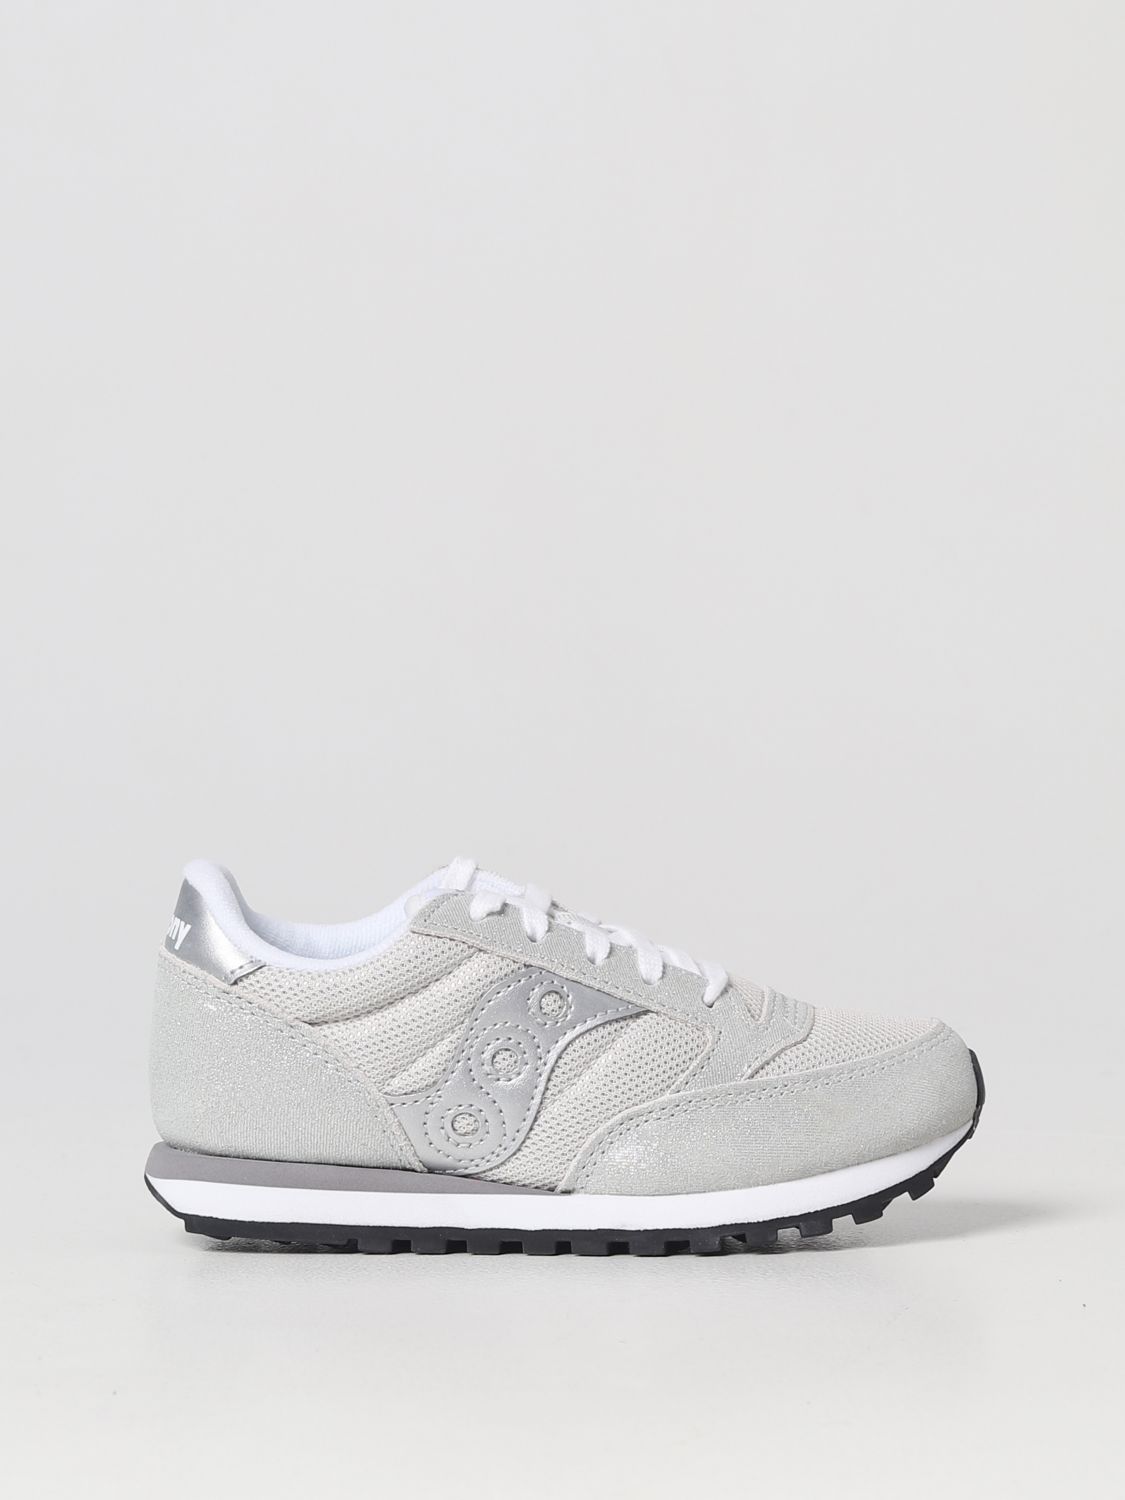 Chaussures Saucony: Chaussures Saucony fille argent 1